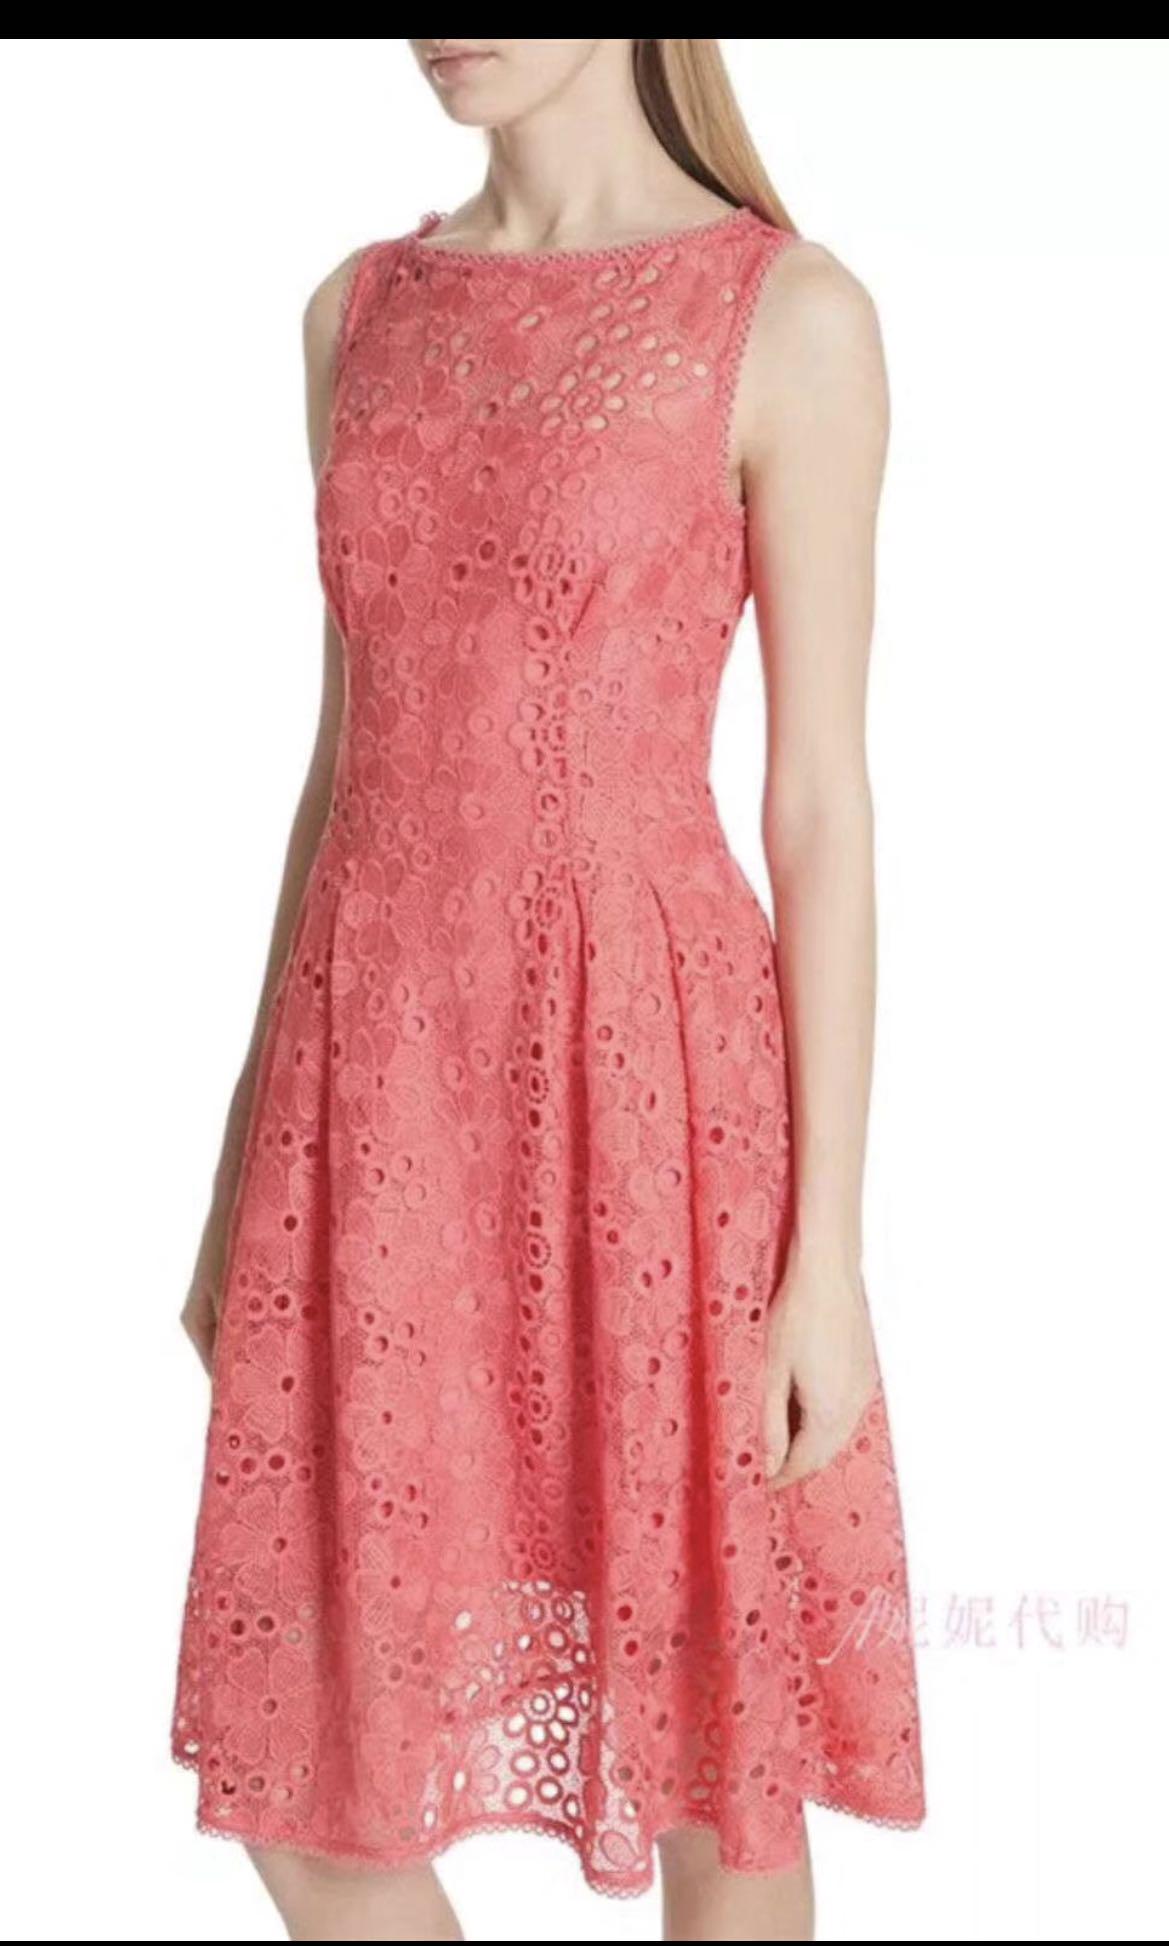 kate spade red lace dress